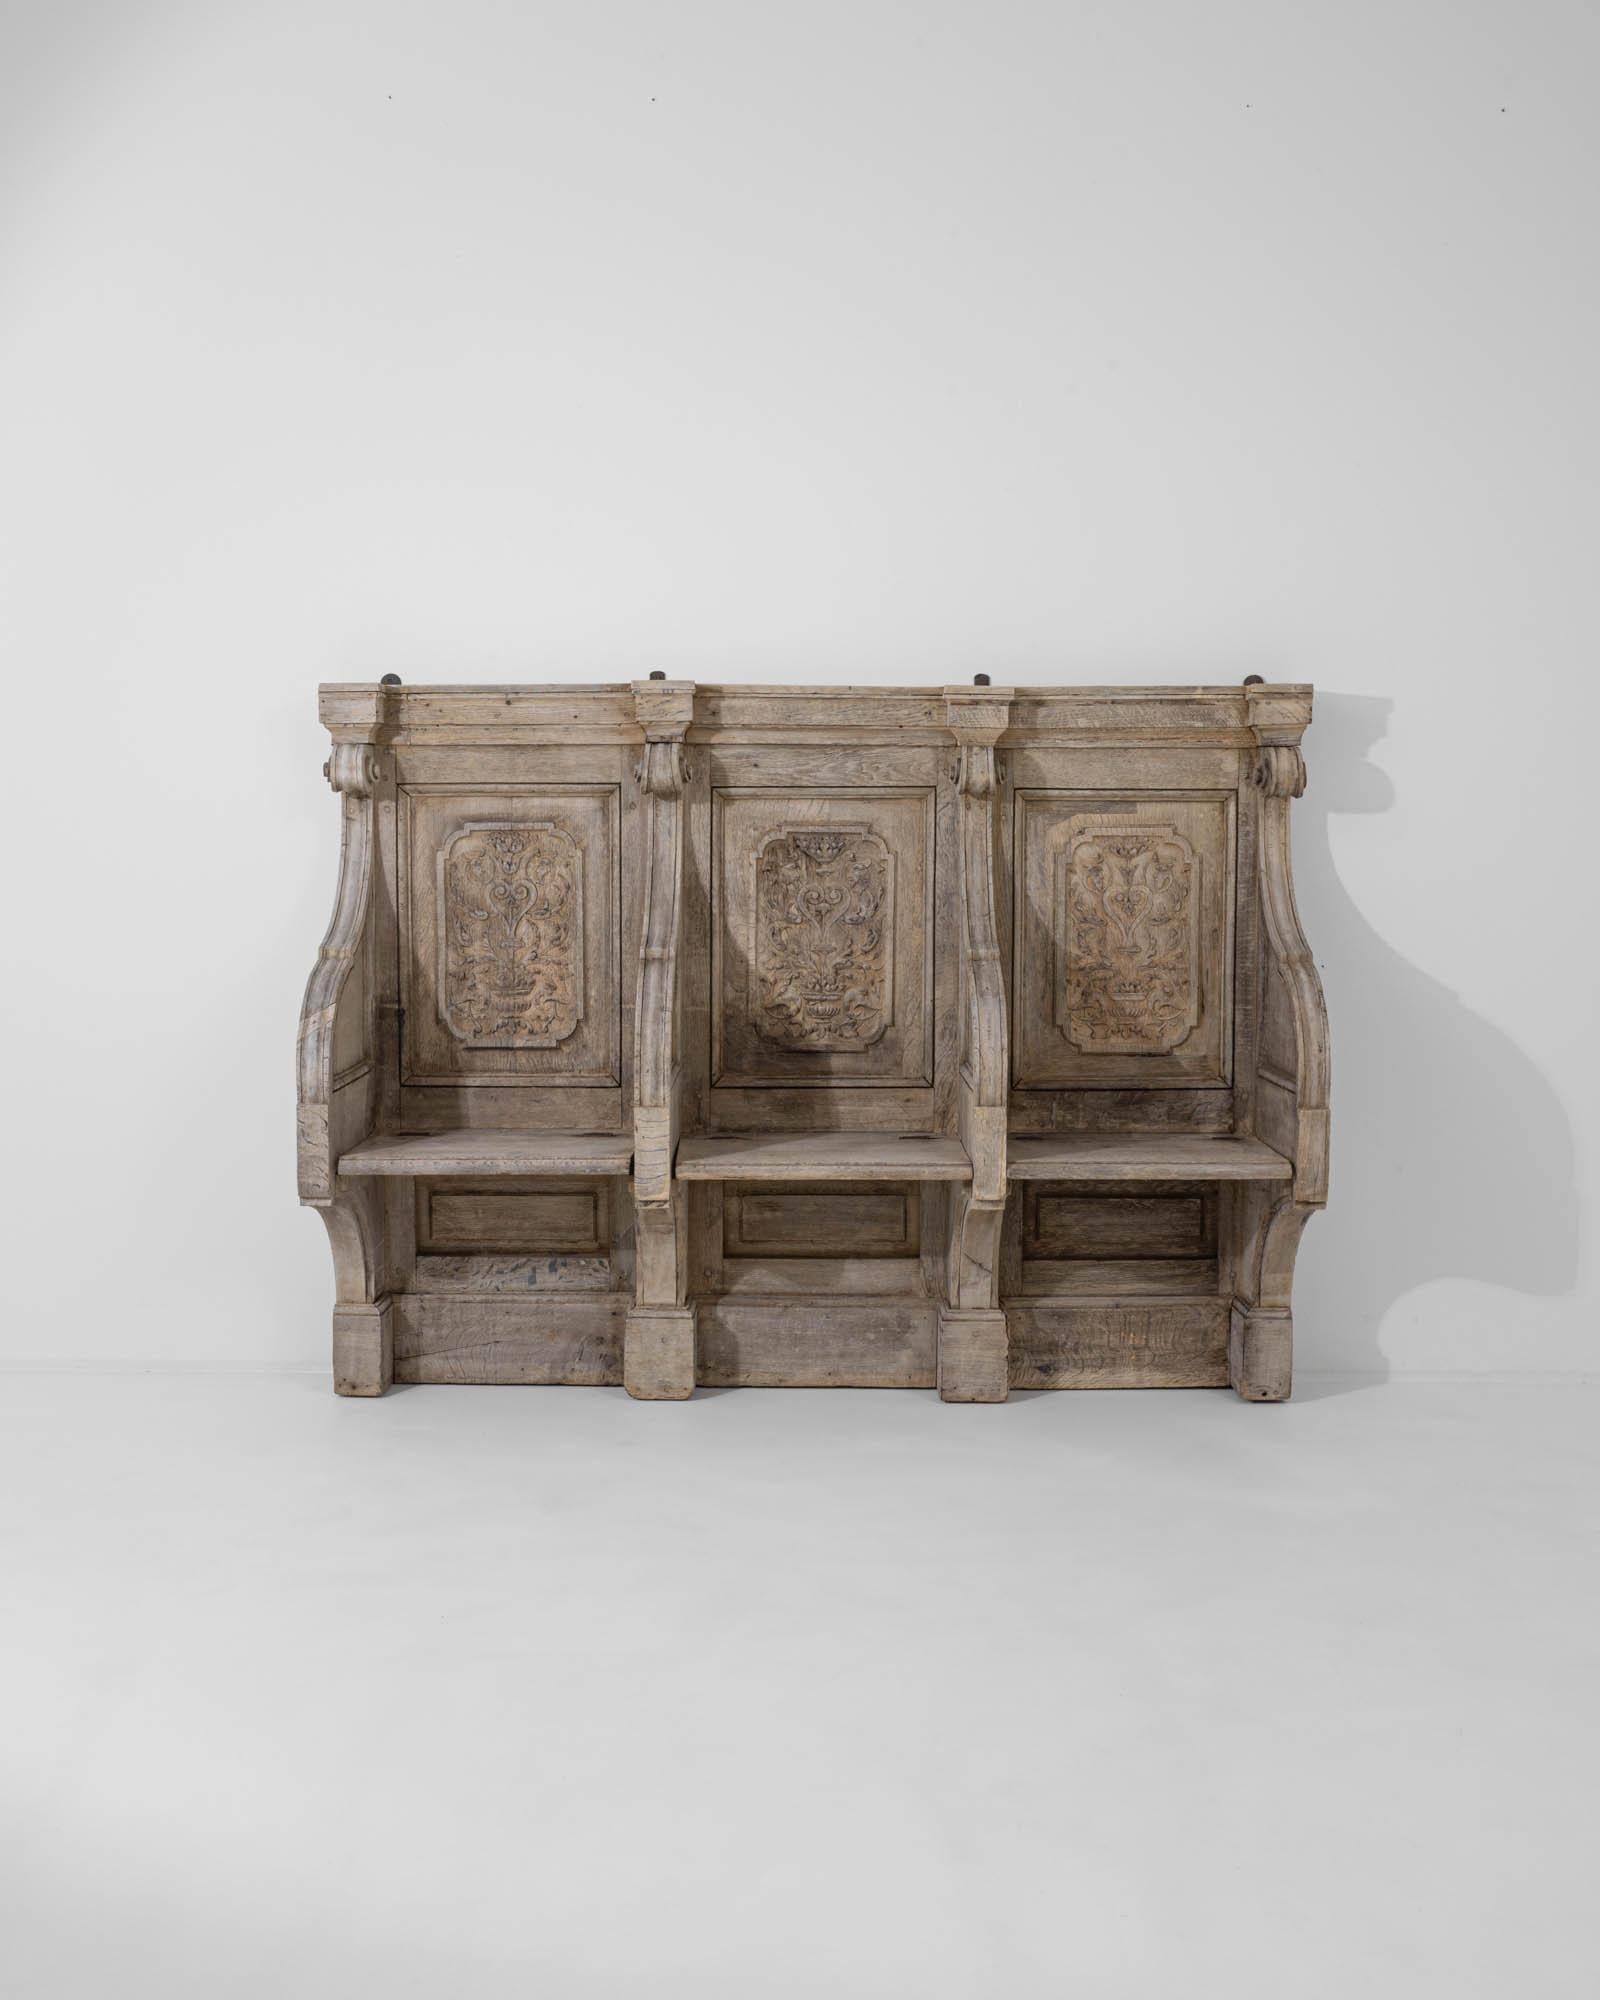 A wooden bench created in early 19th century France. Masterfully sculpted and full of antiquated charm, this fascinating bench exudes an air of poise and rustic farmhouse allure. The segmented shape, richly ornamented, gives this intriguing find a